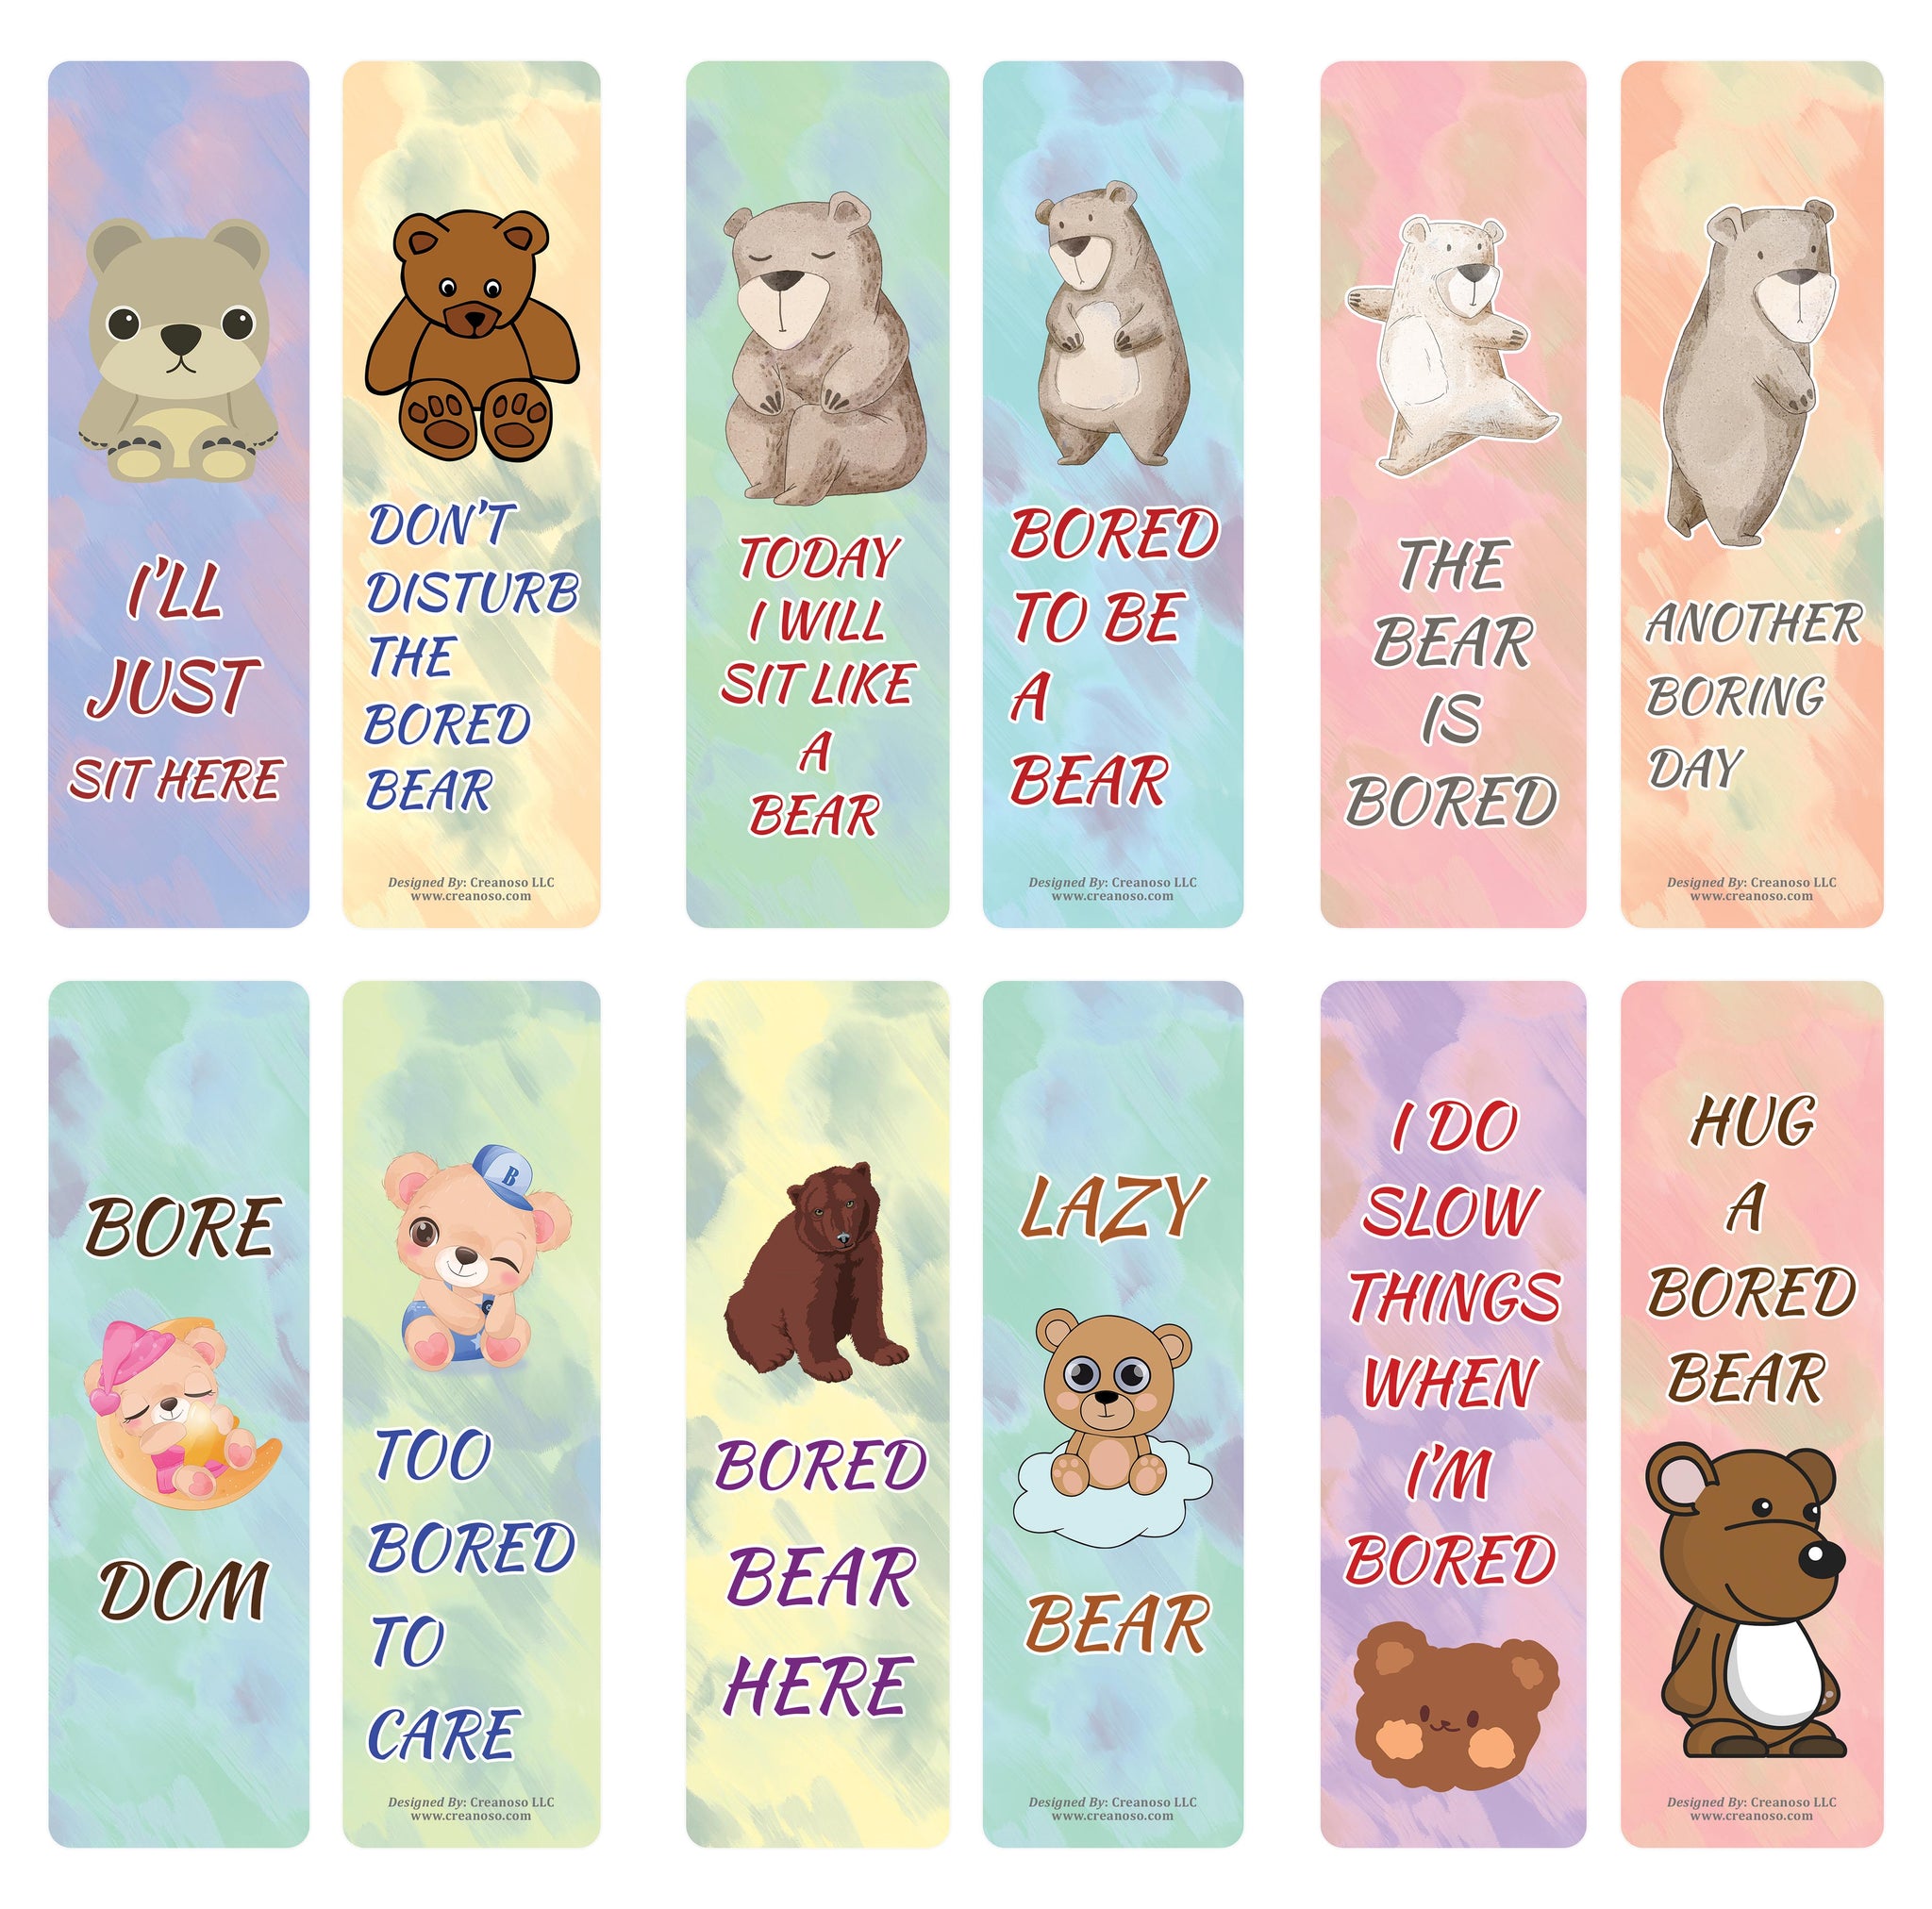 Creanoso Bored Animal Sayings Bookmarks - Bear Theme (10-Sets X 6 Cards) â€“ Daily Inspirational Card Set â€“ Interesting Book Page Clippers â€“ Great Gifts for Adults and Professionals